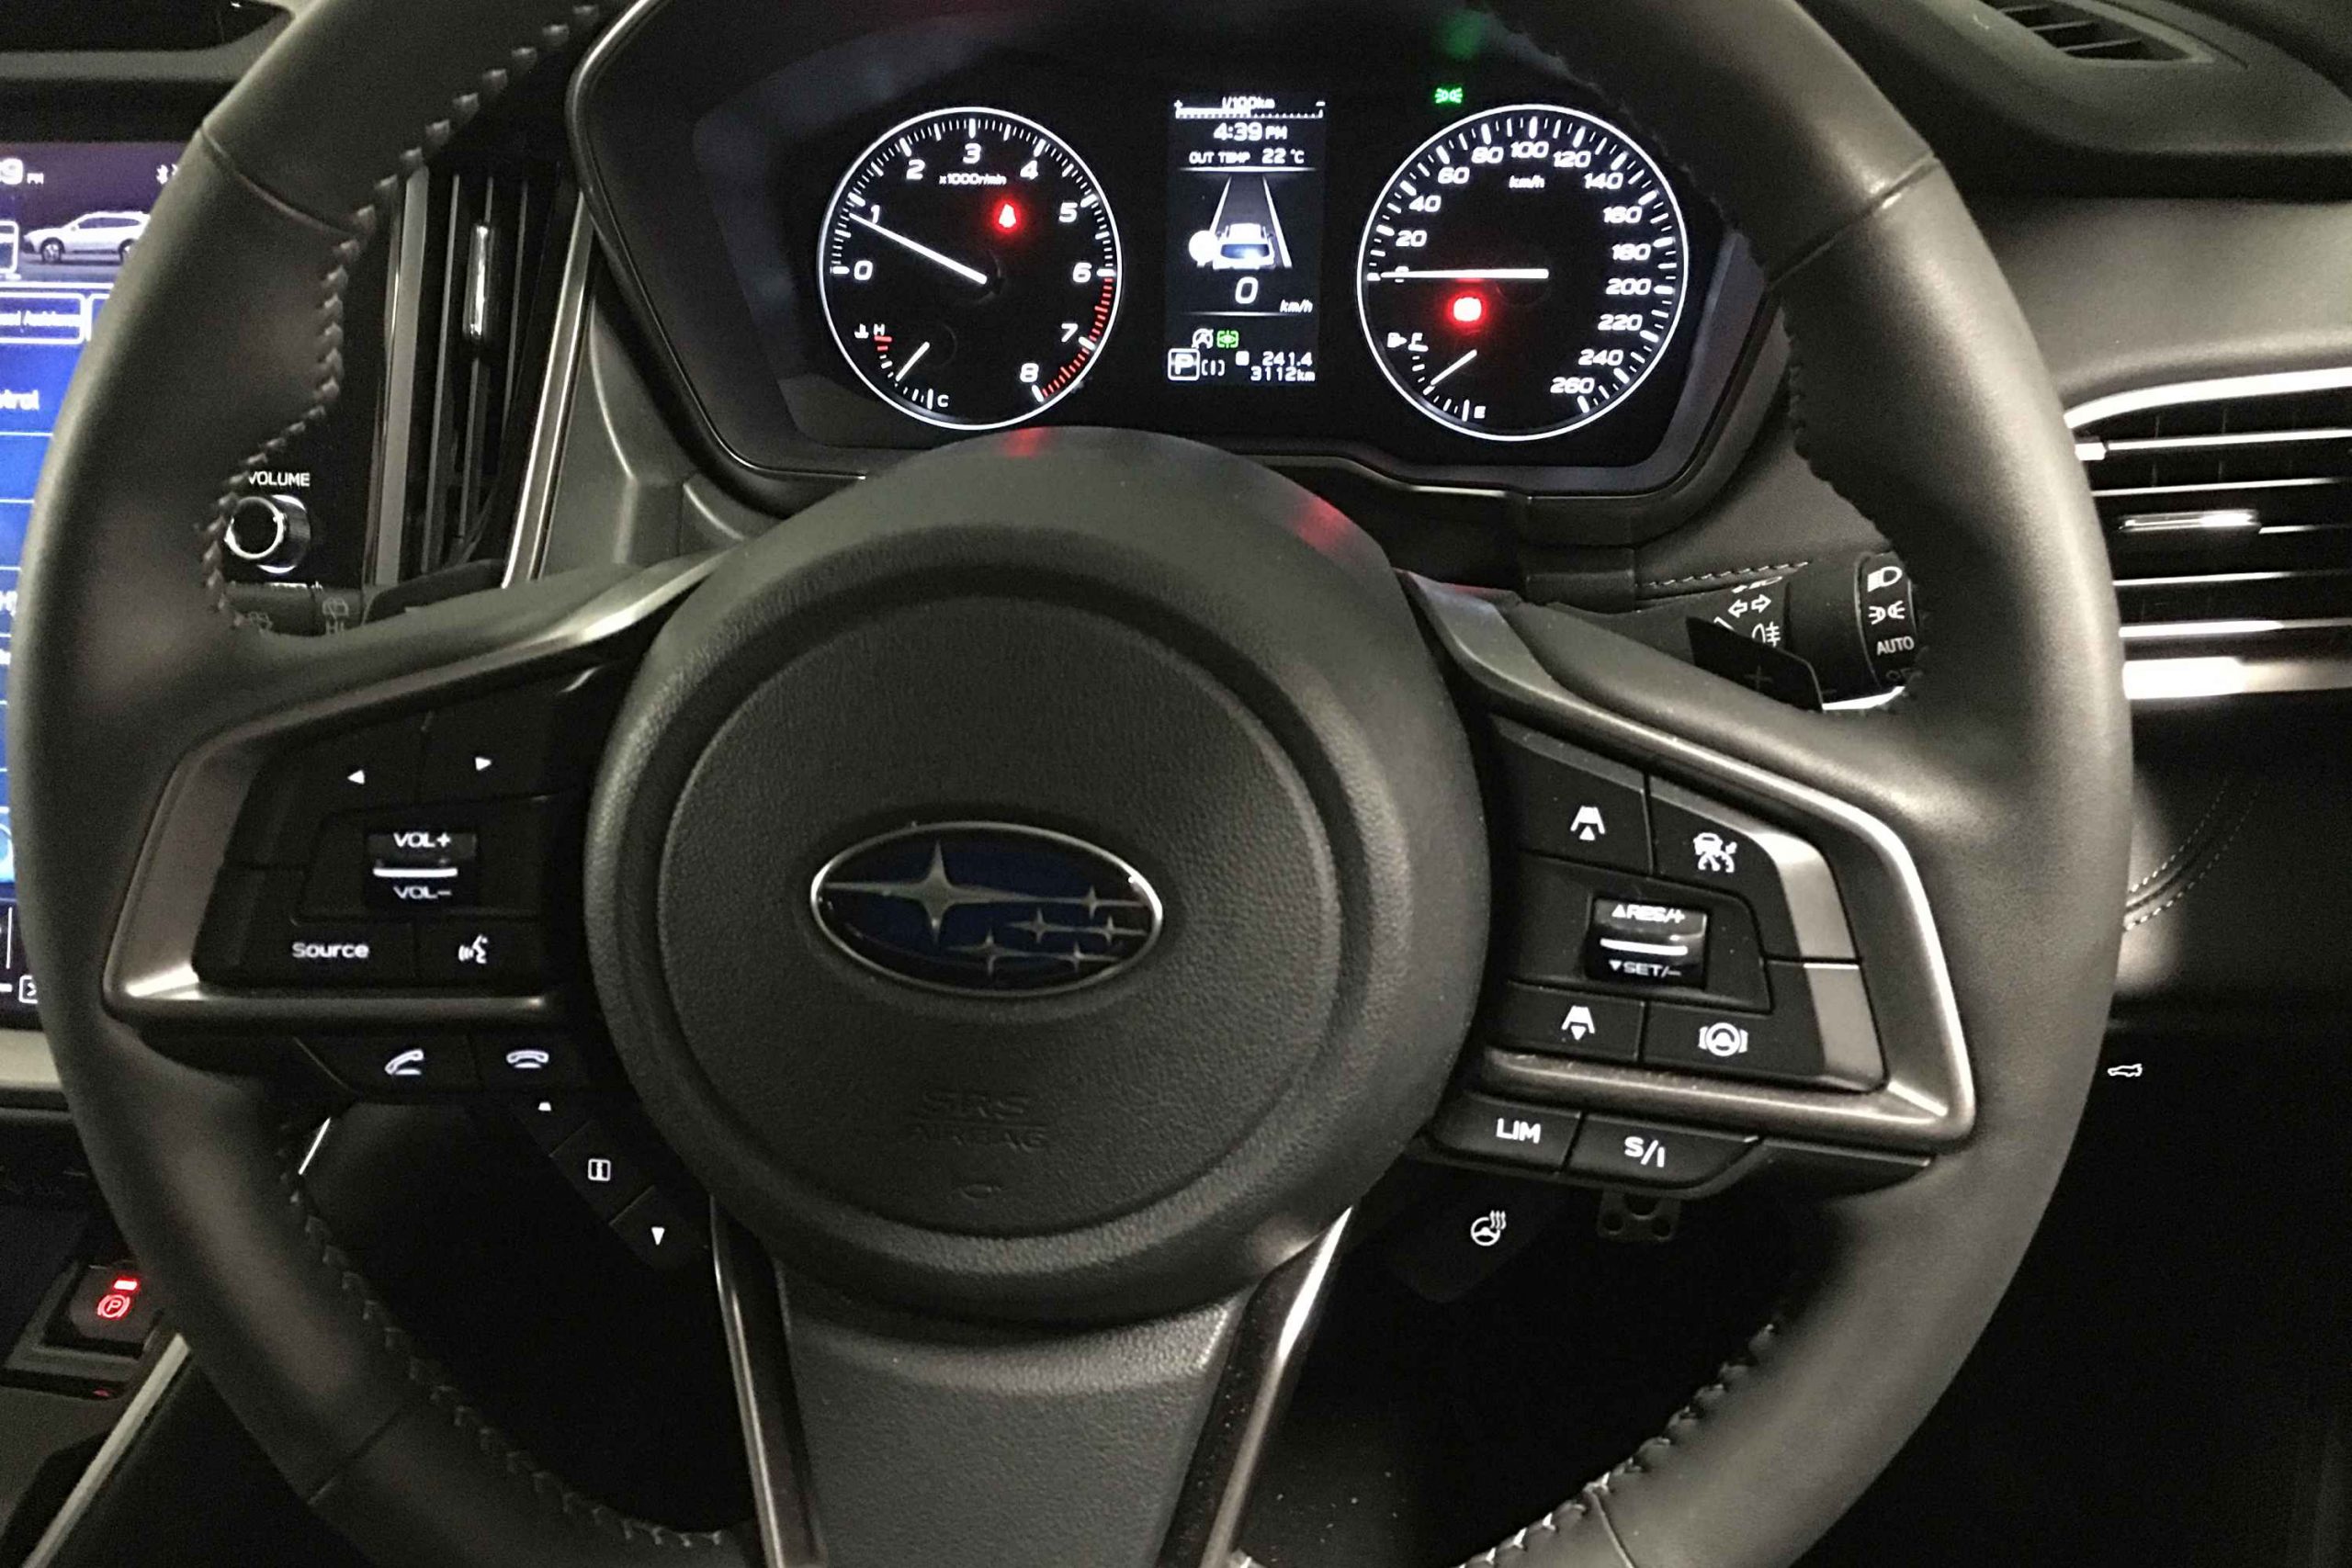 Subaru-Outback-Touring-Interior-Drivers-Scales